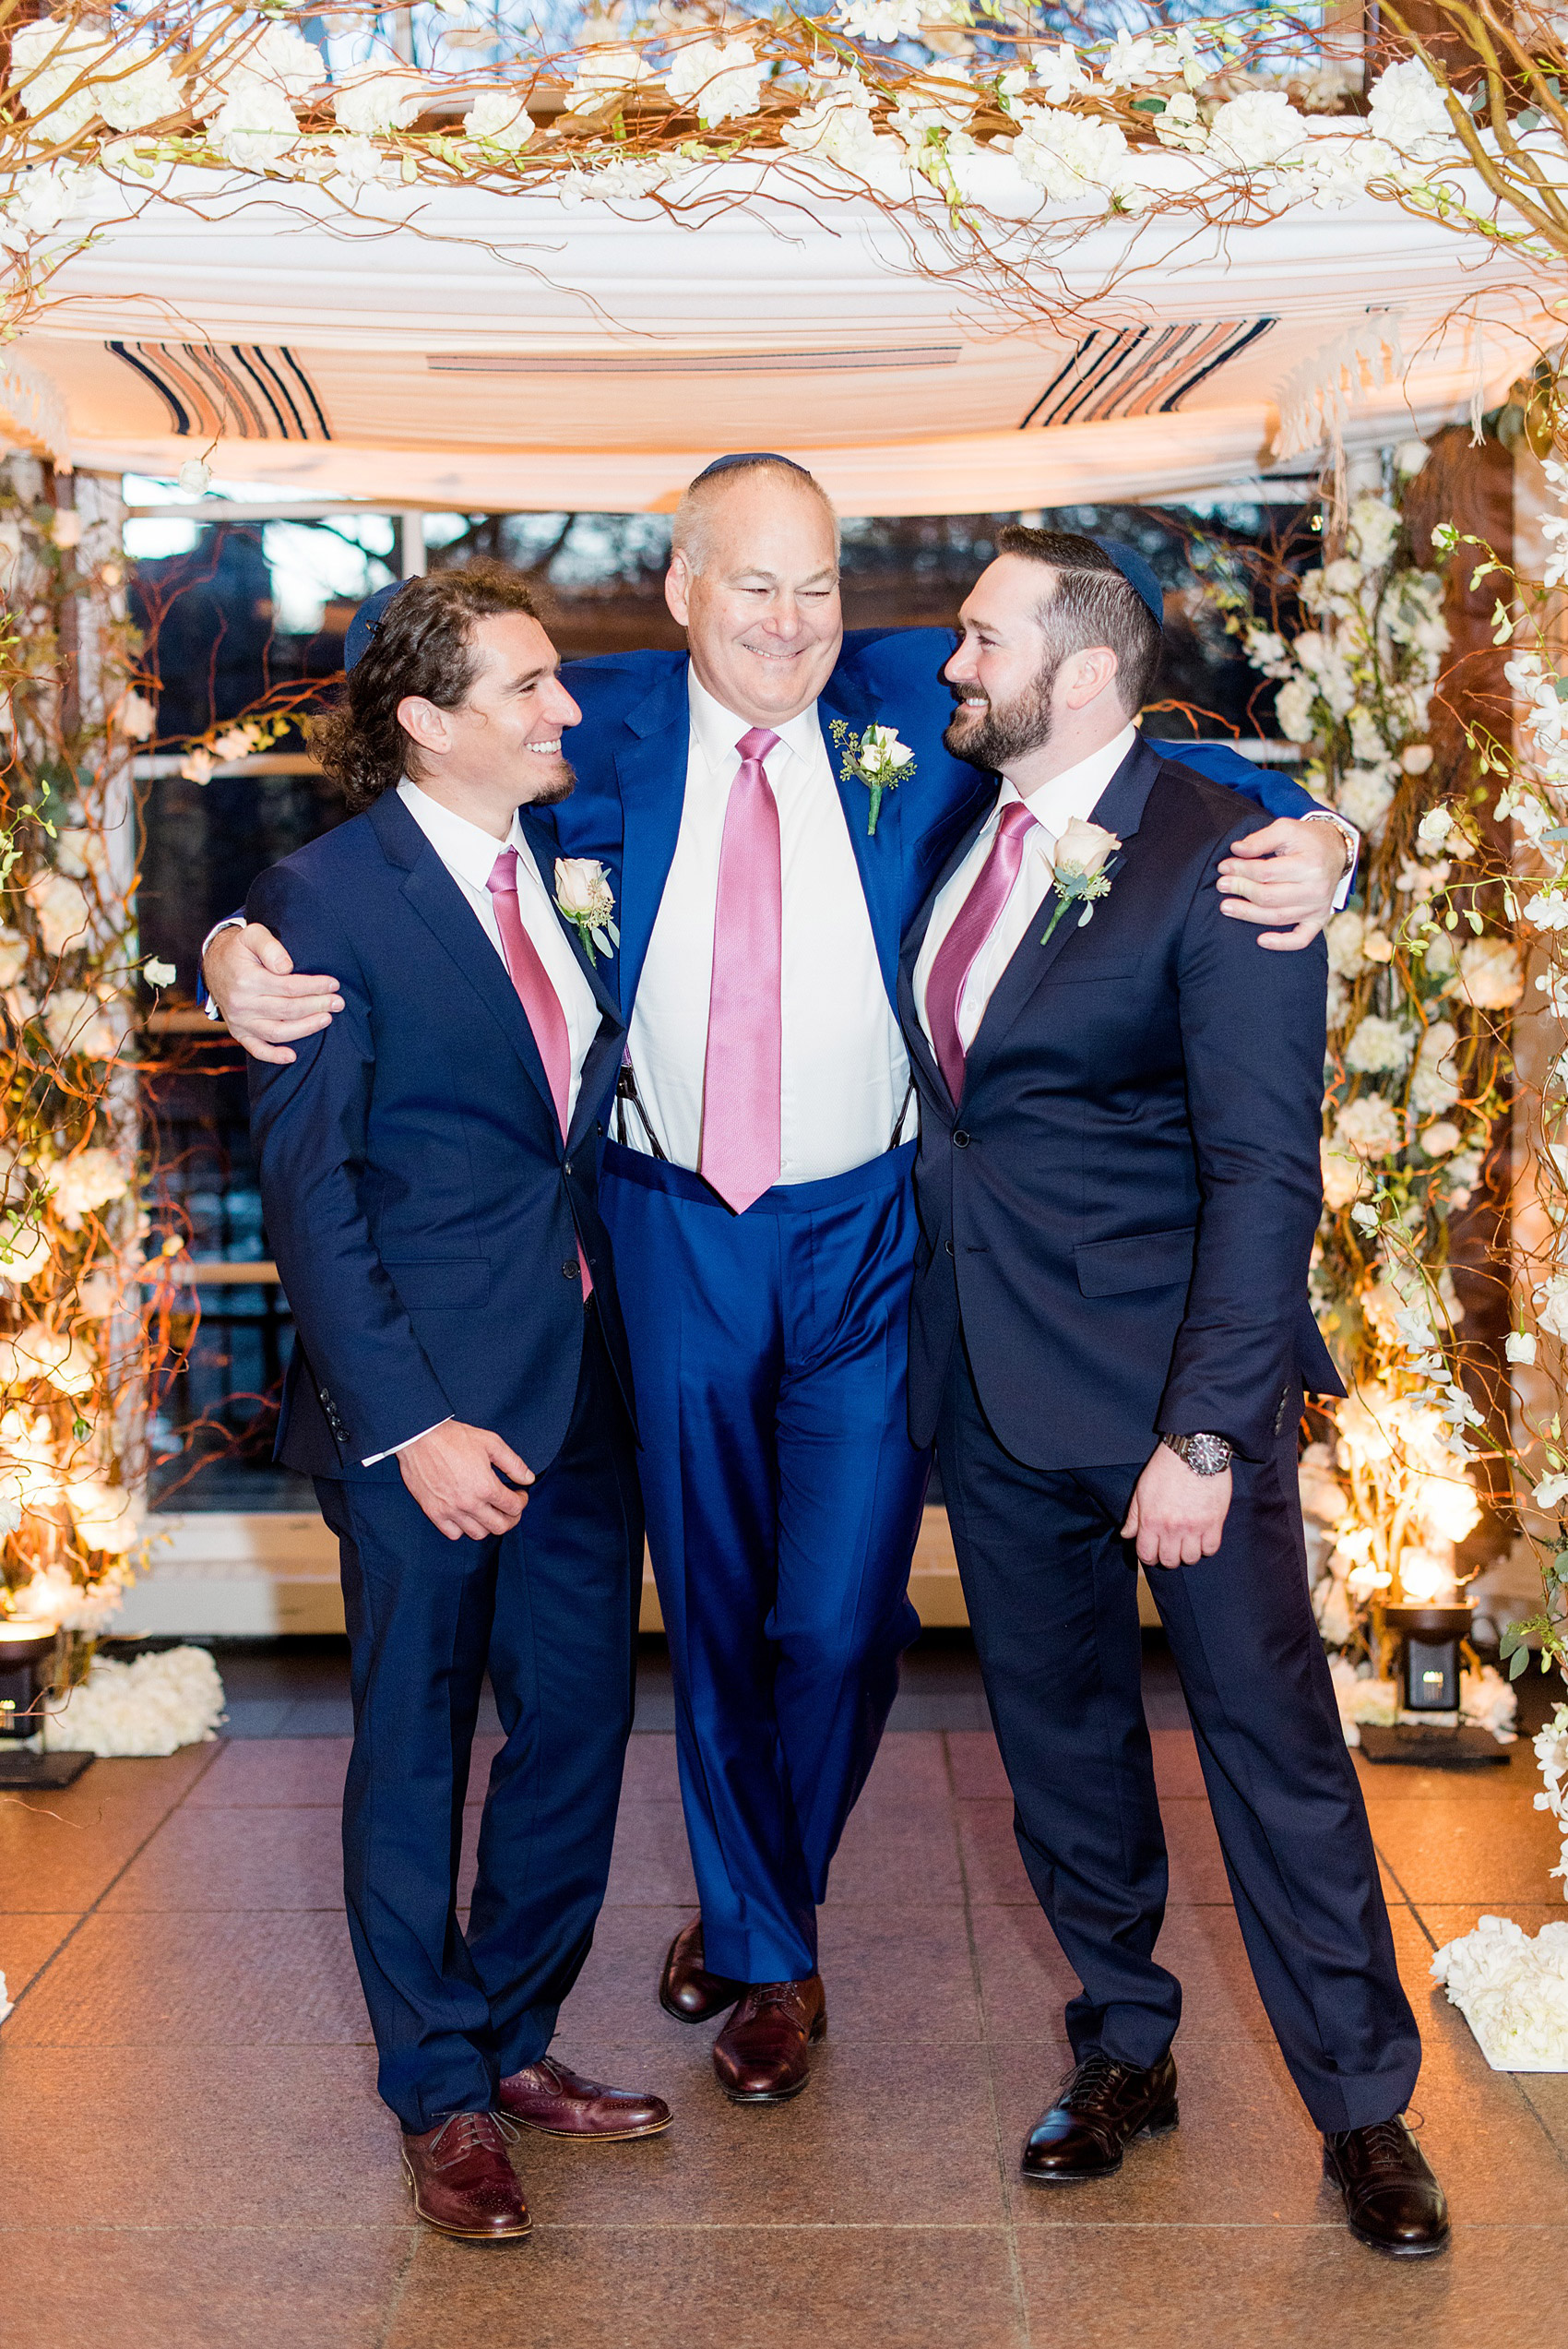 Photos by Mikkel Paige Photography of a Central Park Wedding reception at the Loeb Boathouse venue with a romantic theme. Picture of the groom with his sons under the winter inspired chuppah for their Jewish ceremony. Click through for more images from their day! #CentralParkWedding